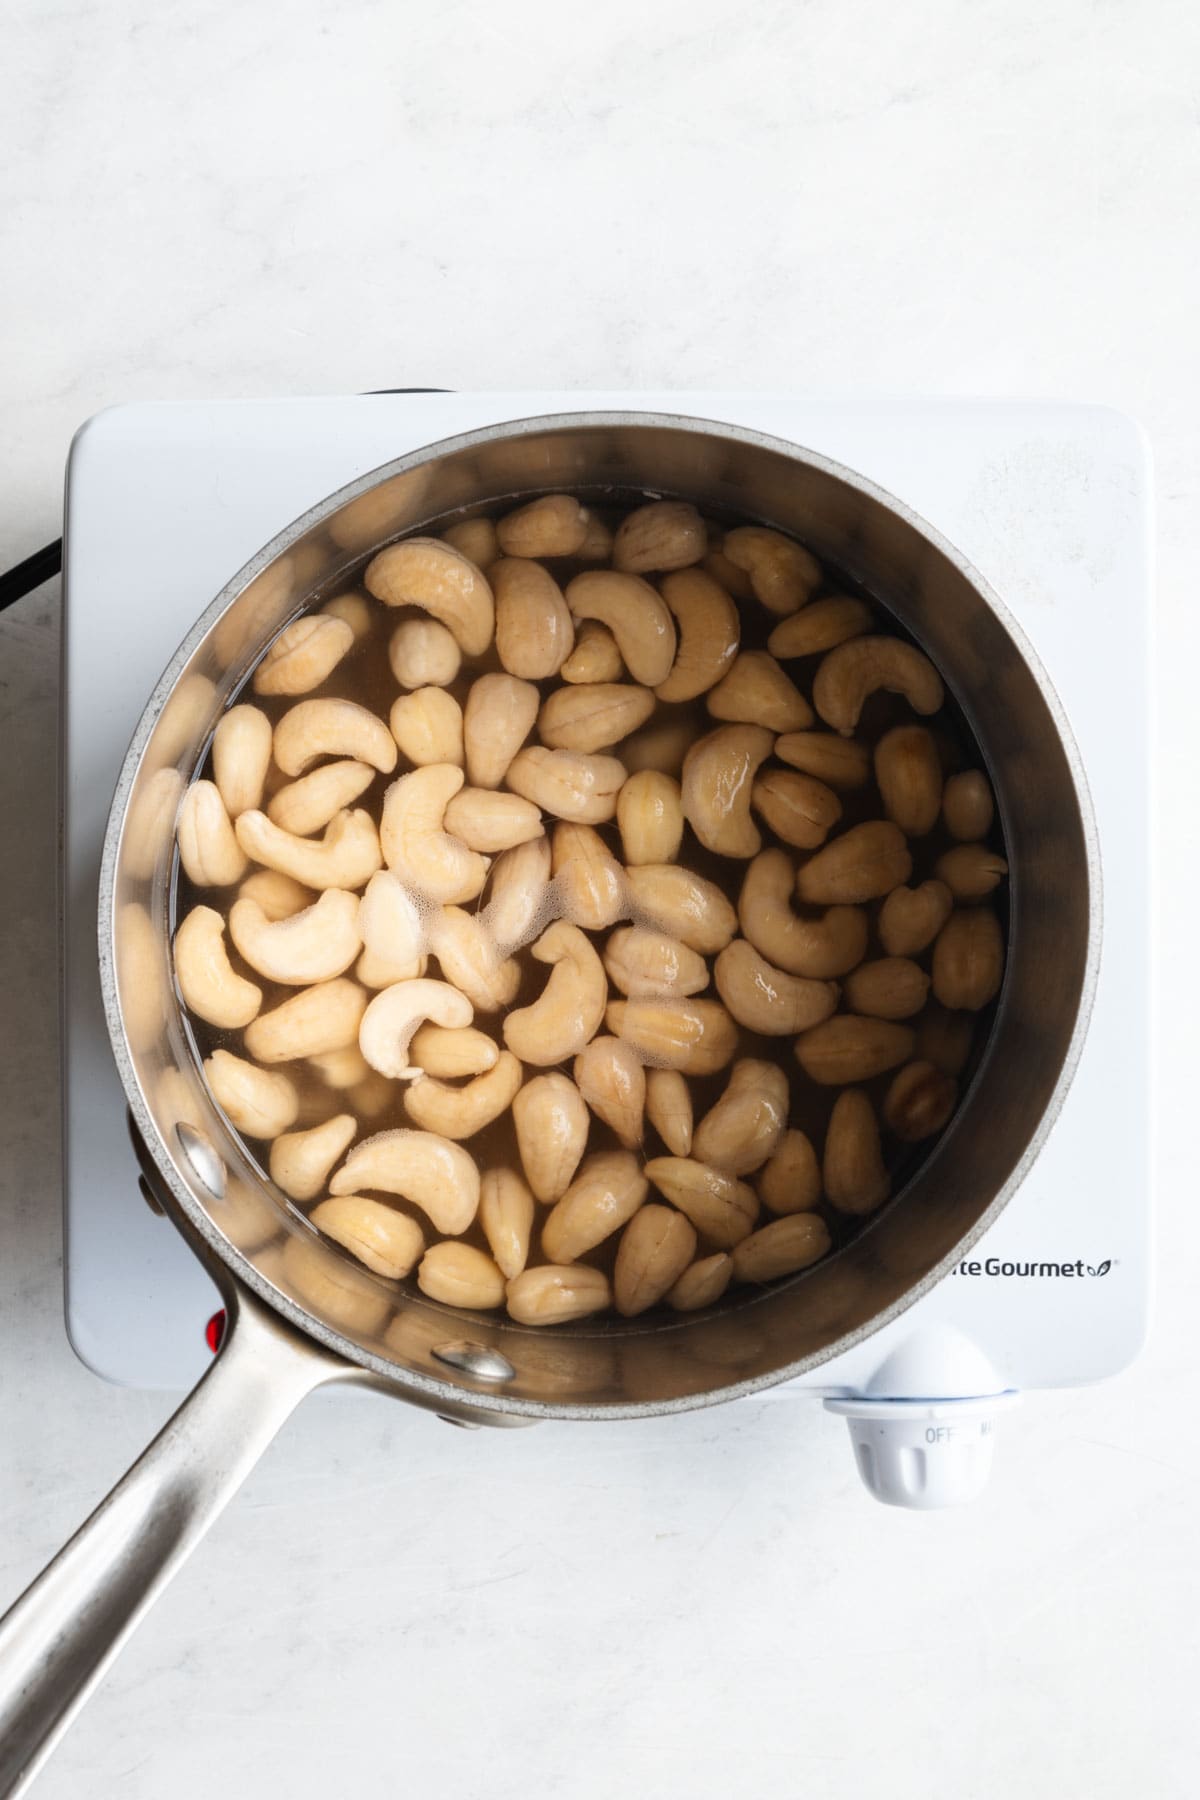 Cashews soaking in boiled water in a stainless stele saucepan.